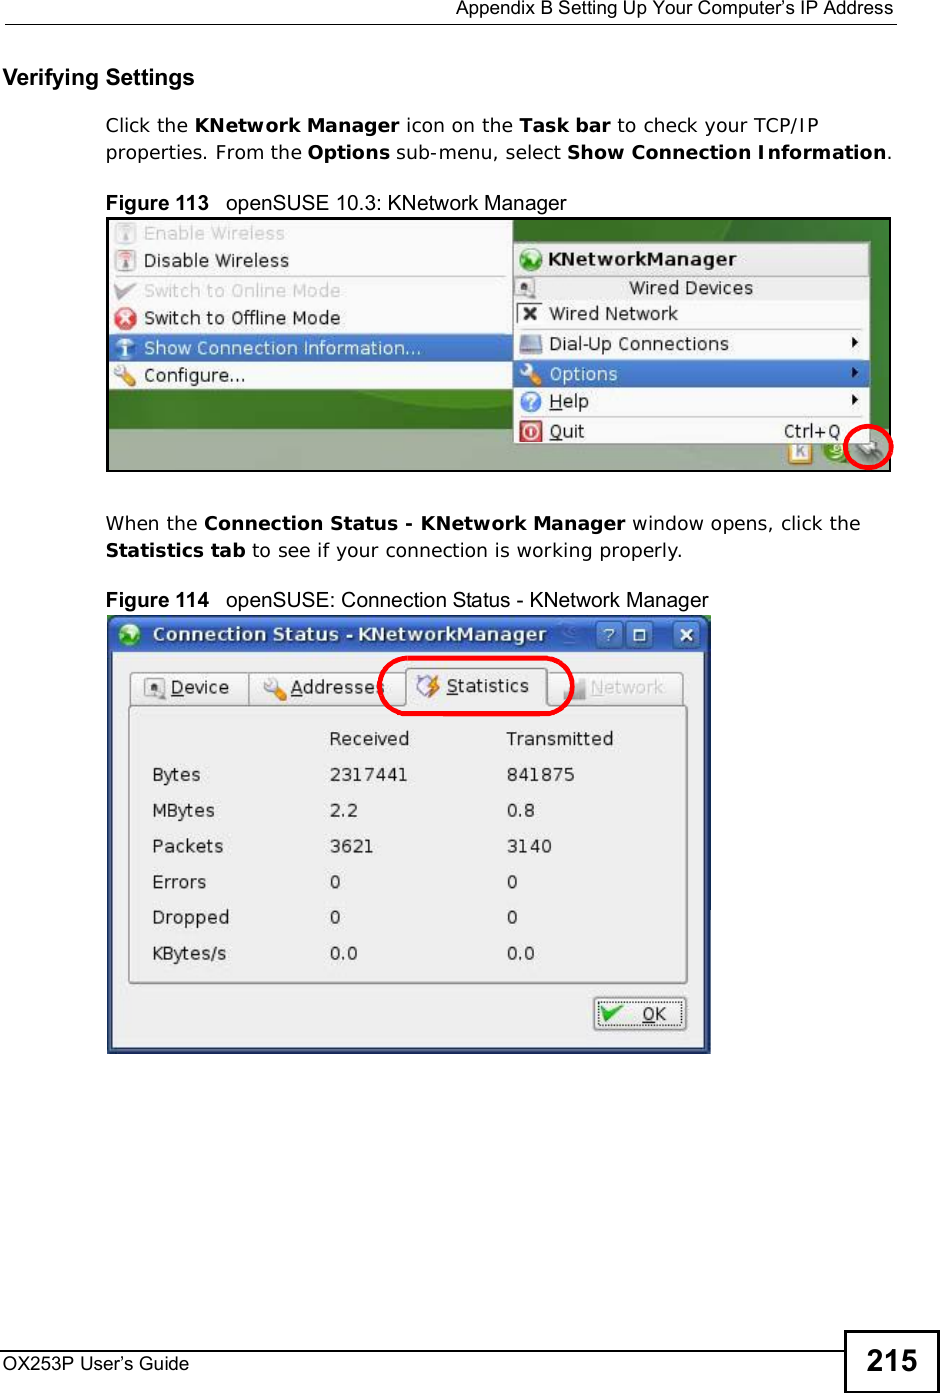  Appendix BSetting Up Your Computer’s IP AddressOX253P User’s Guide 215Verifying SettingsClick the KNetwork Manager icon on the Task bar to check your TCP/IP properties. From the Options sub-menu, select Show Connection Information.Figure 113   openSUSE 10.3: KNetwork ManagerWhen the Connection Status - KNetwork Manager window opens, click the Statistics tab to see if your connection is working properly.Figure 114   openSUSE: Connection Status - KNetwork Manager